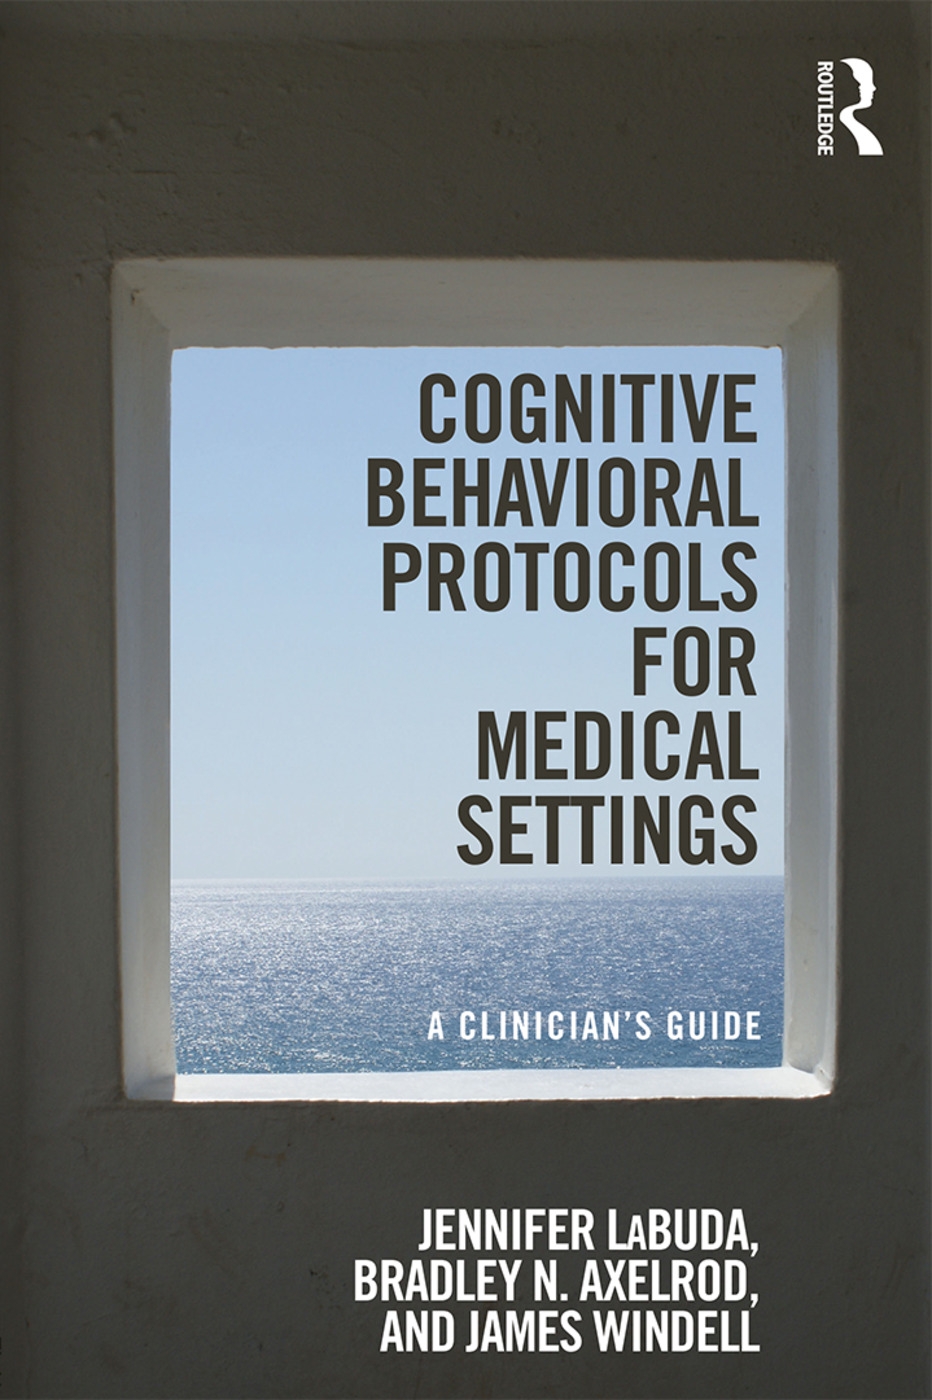 Cognitive Behavioral Protocols for Medical Settings: A Clinician’s Guide